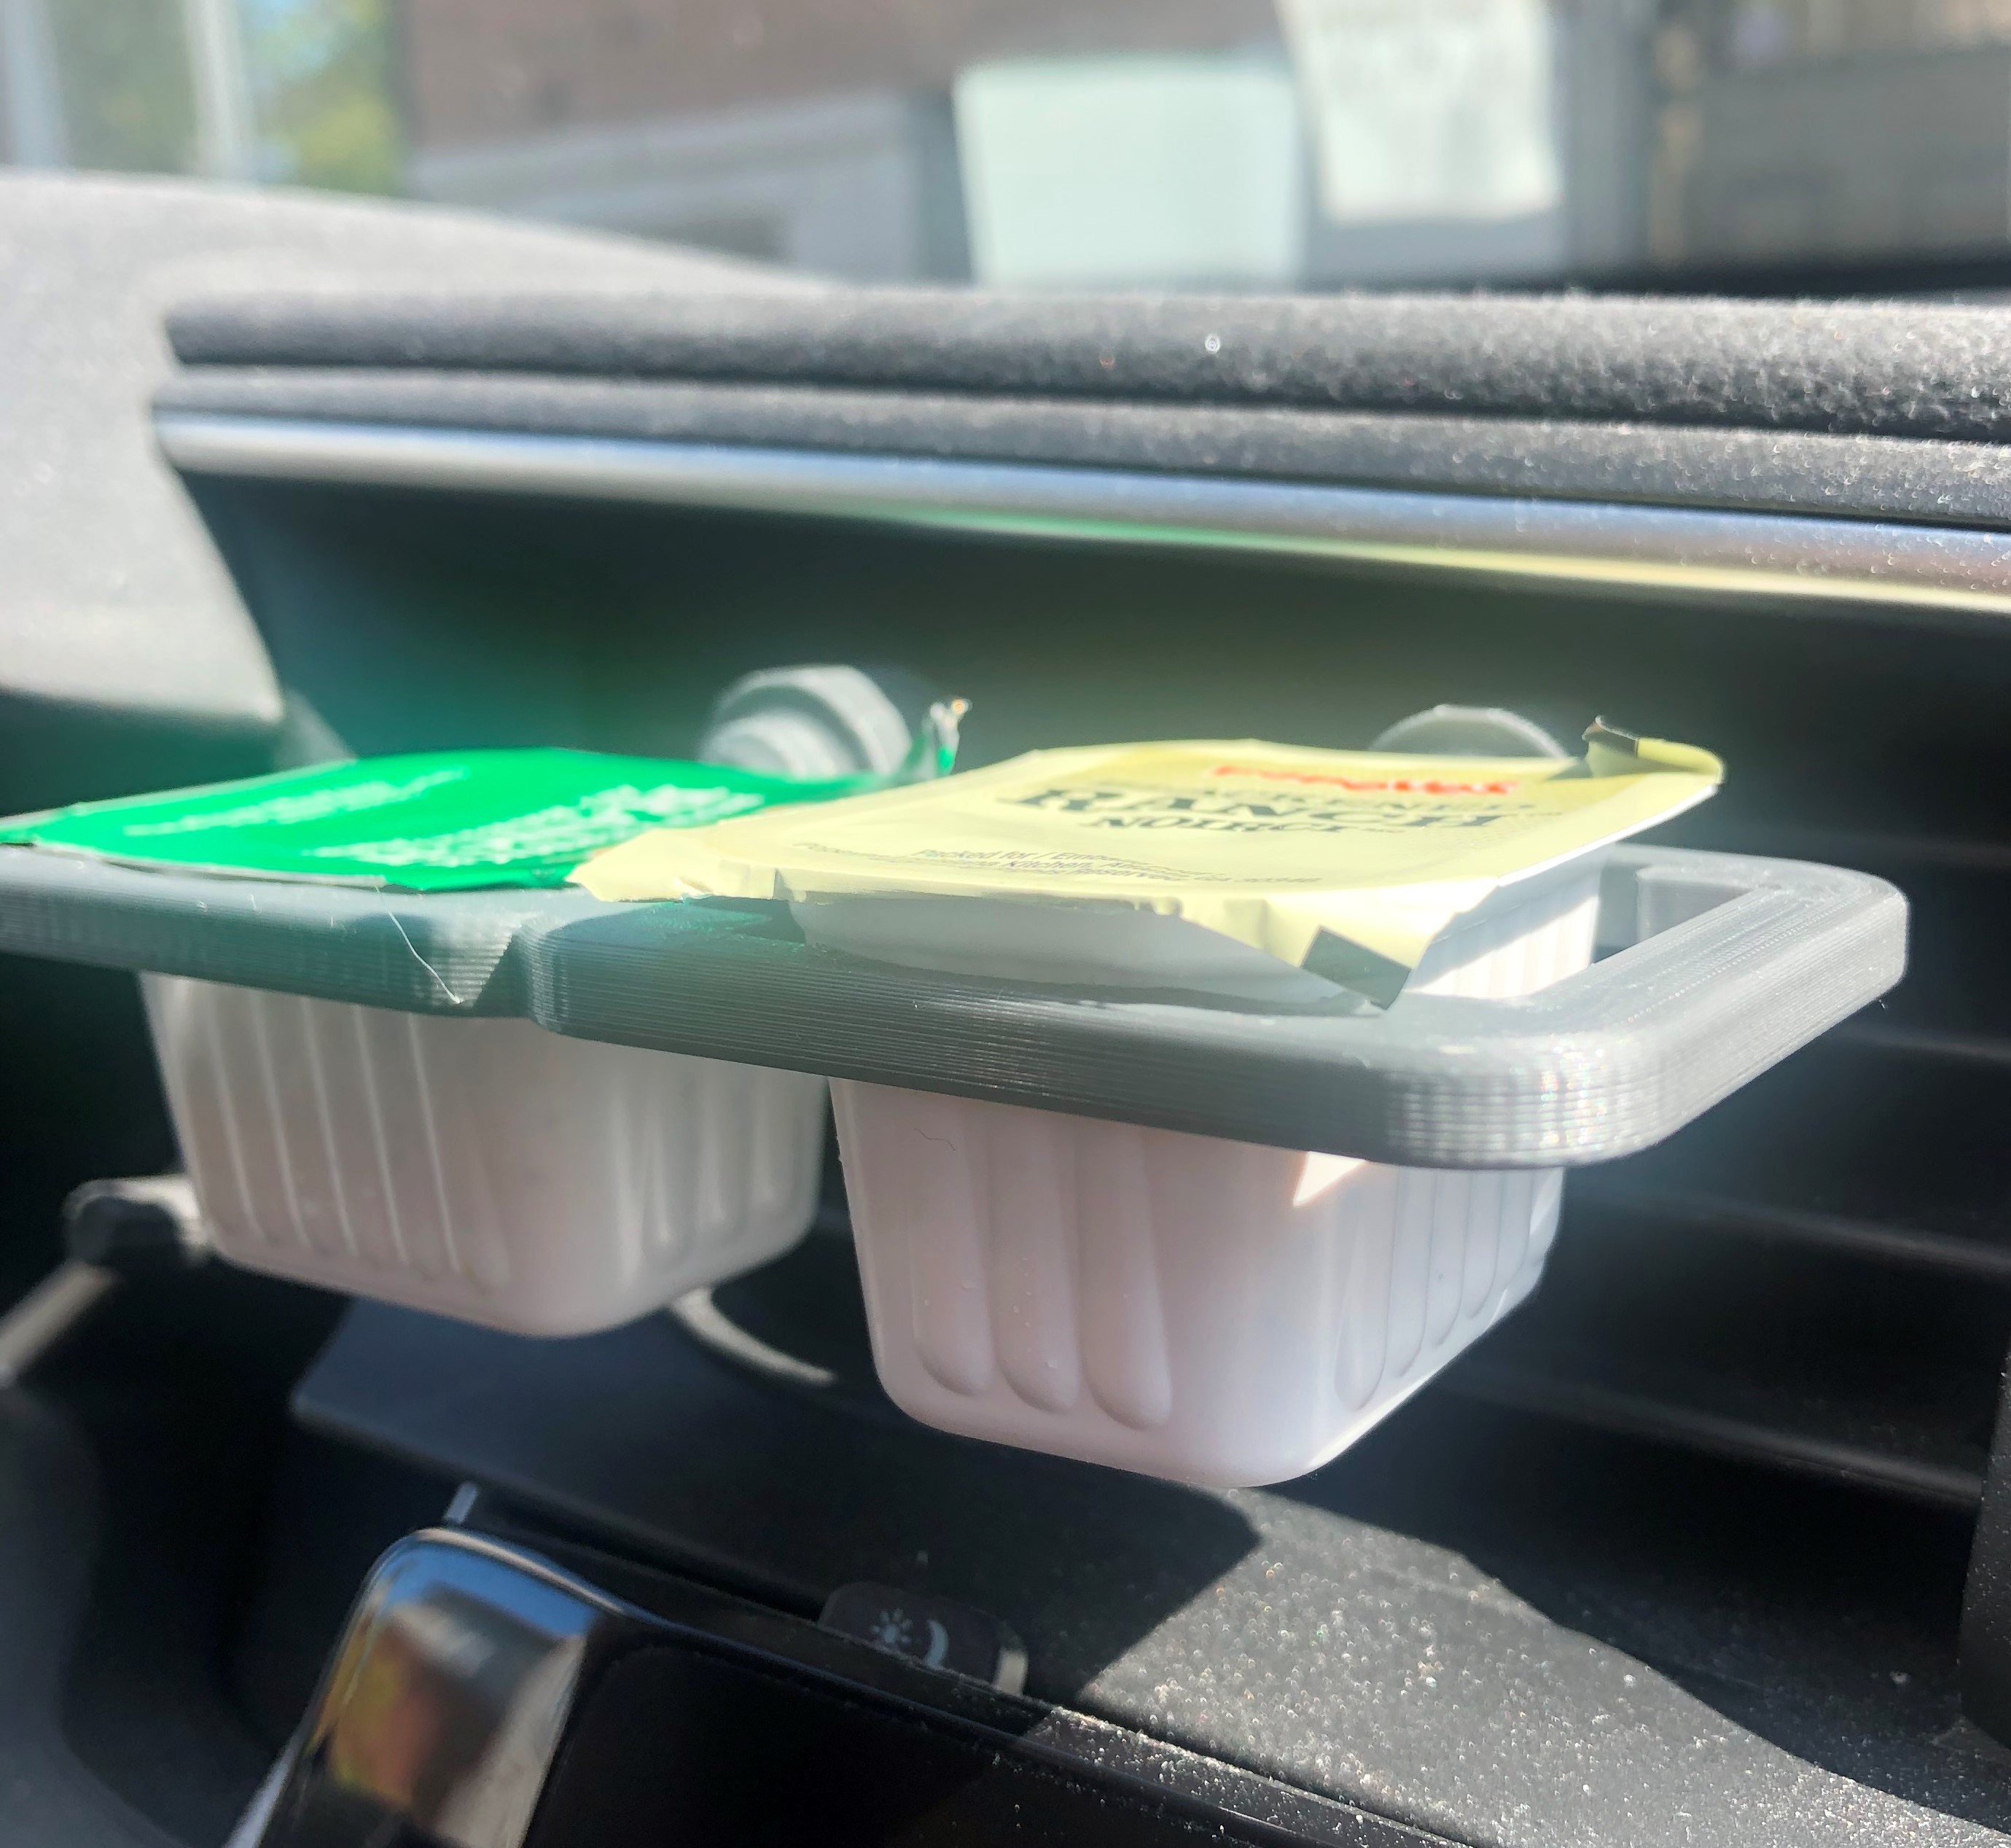 Condiment Cups Holder Used for Fast or Bumpy Driving for Vents of Vehicle Dip Clip In-car Sauce Cup Holder Ketchup Mini Dipping Sauce Cups Car Accessories 6 Pack 